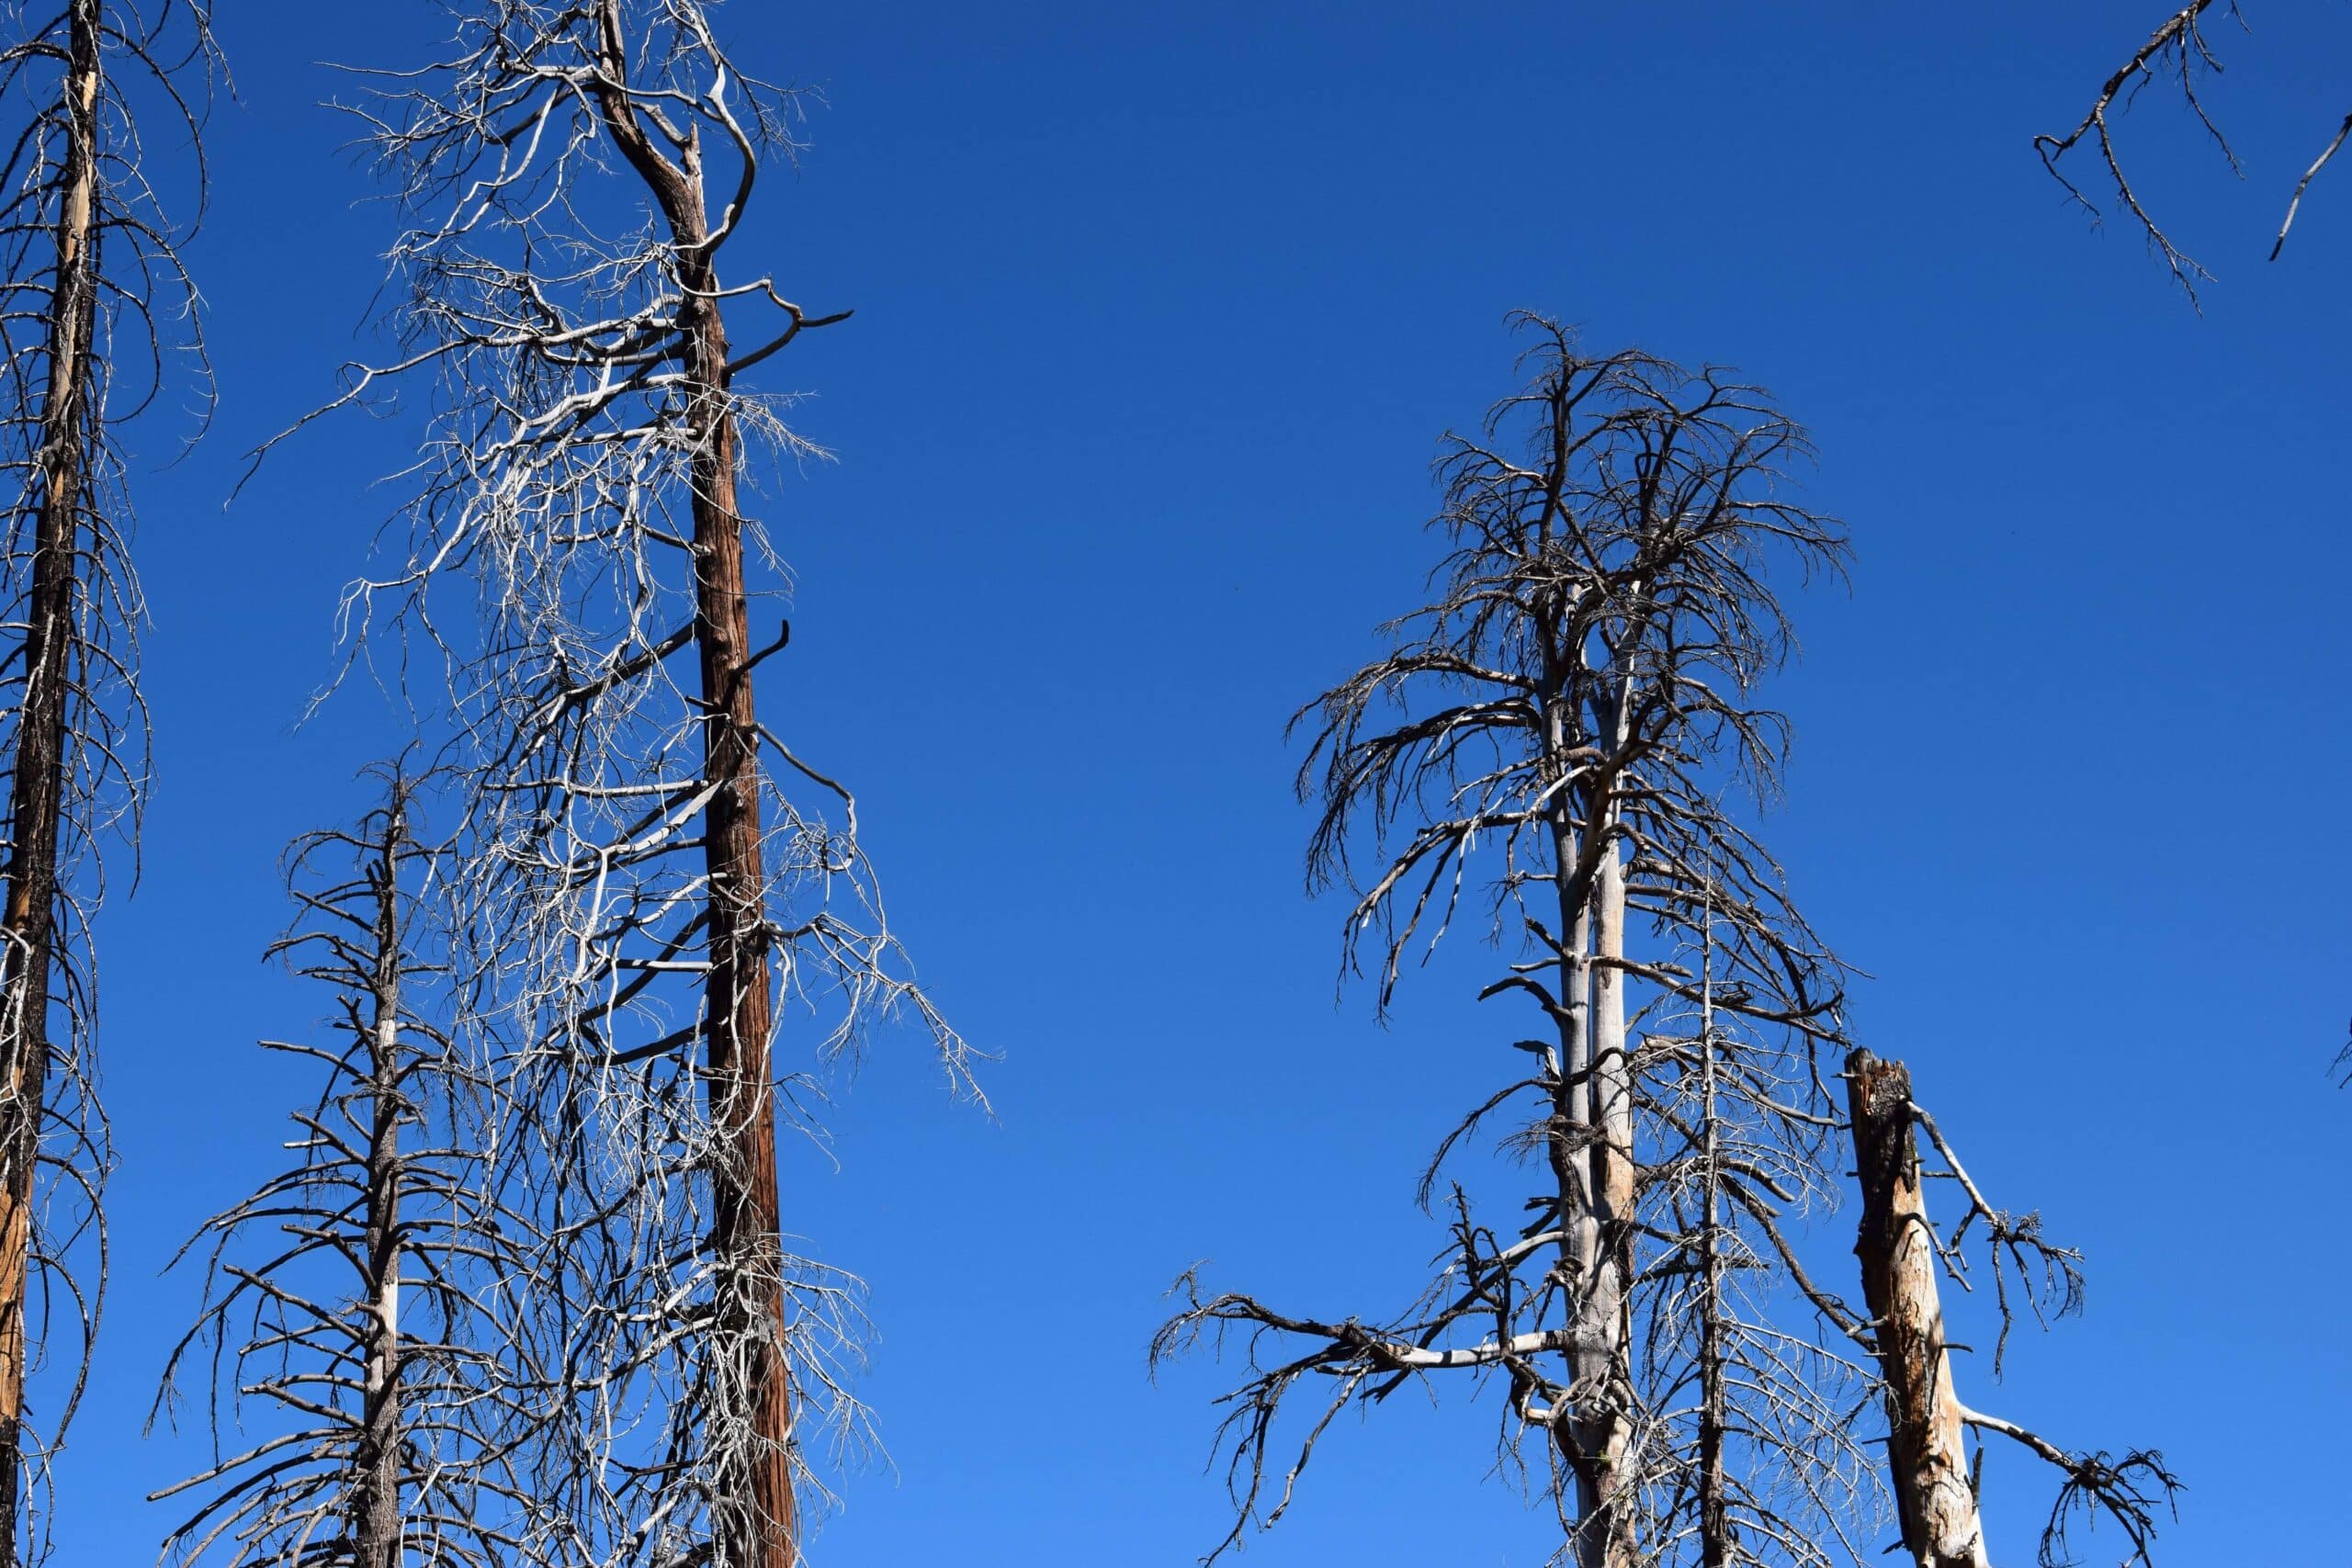 A group of dead trees that have been burned by a forest fire.